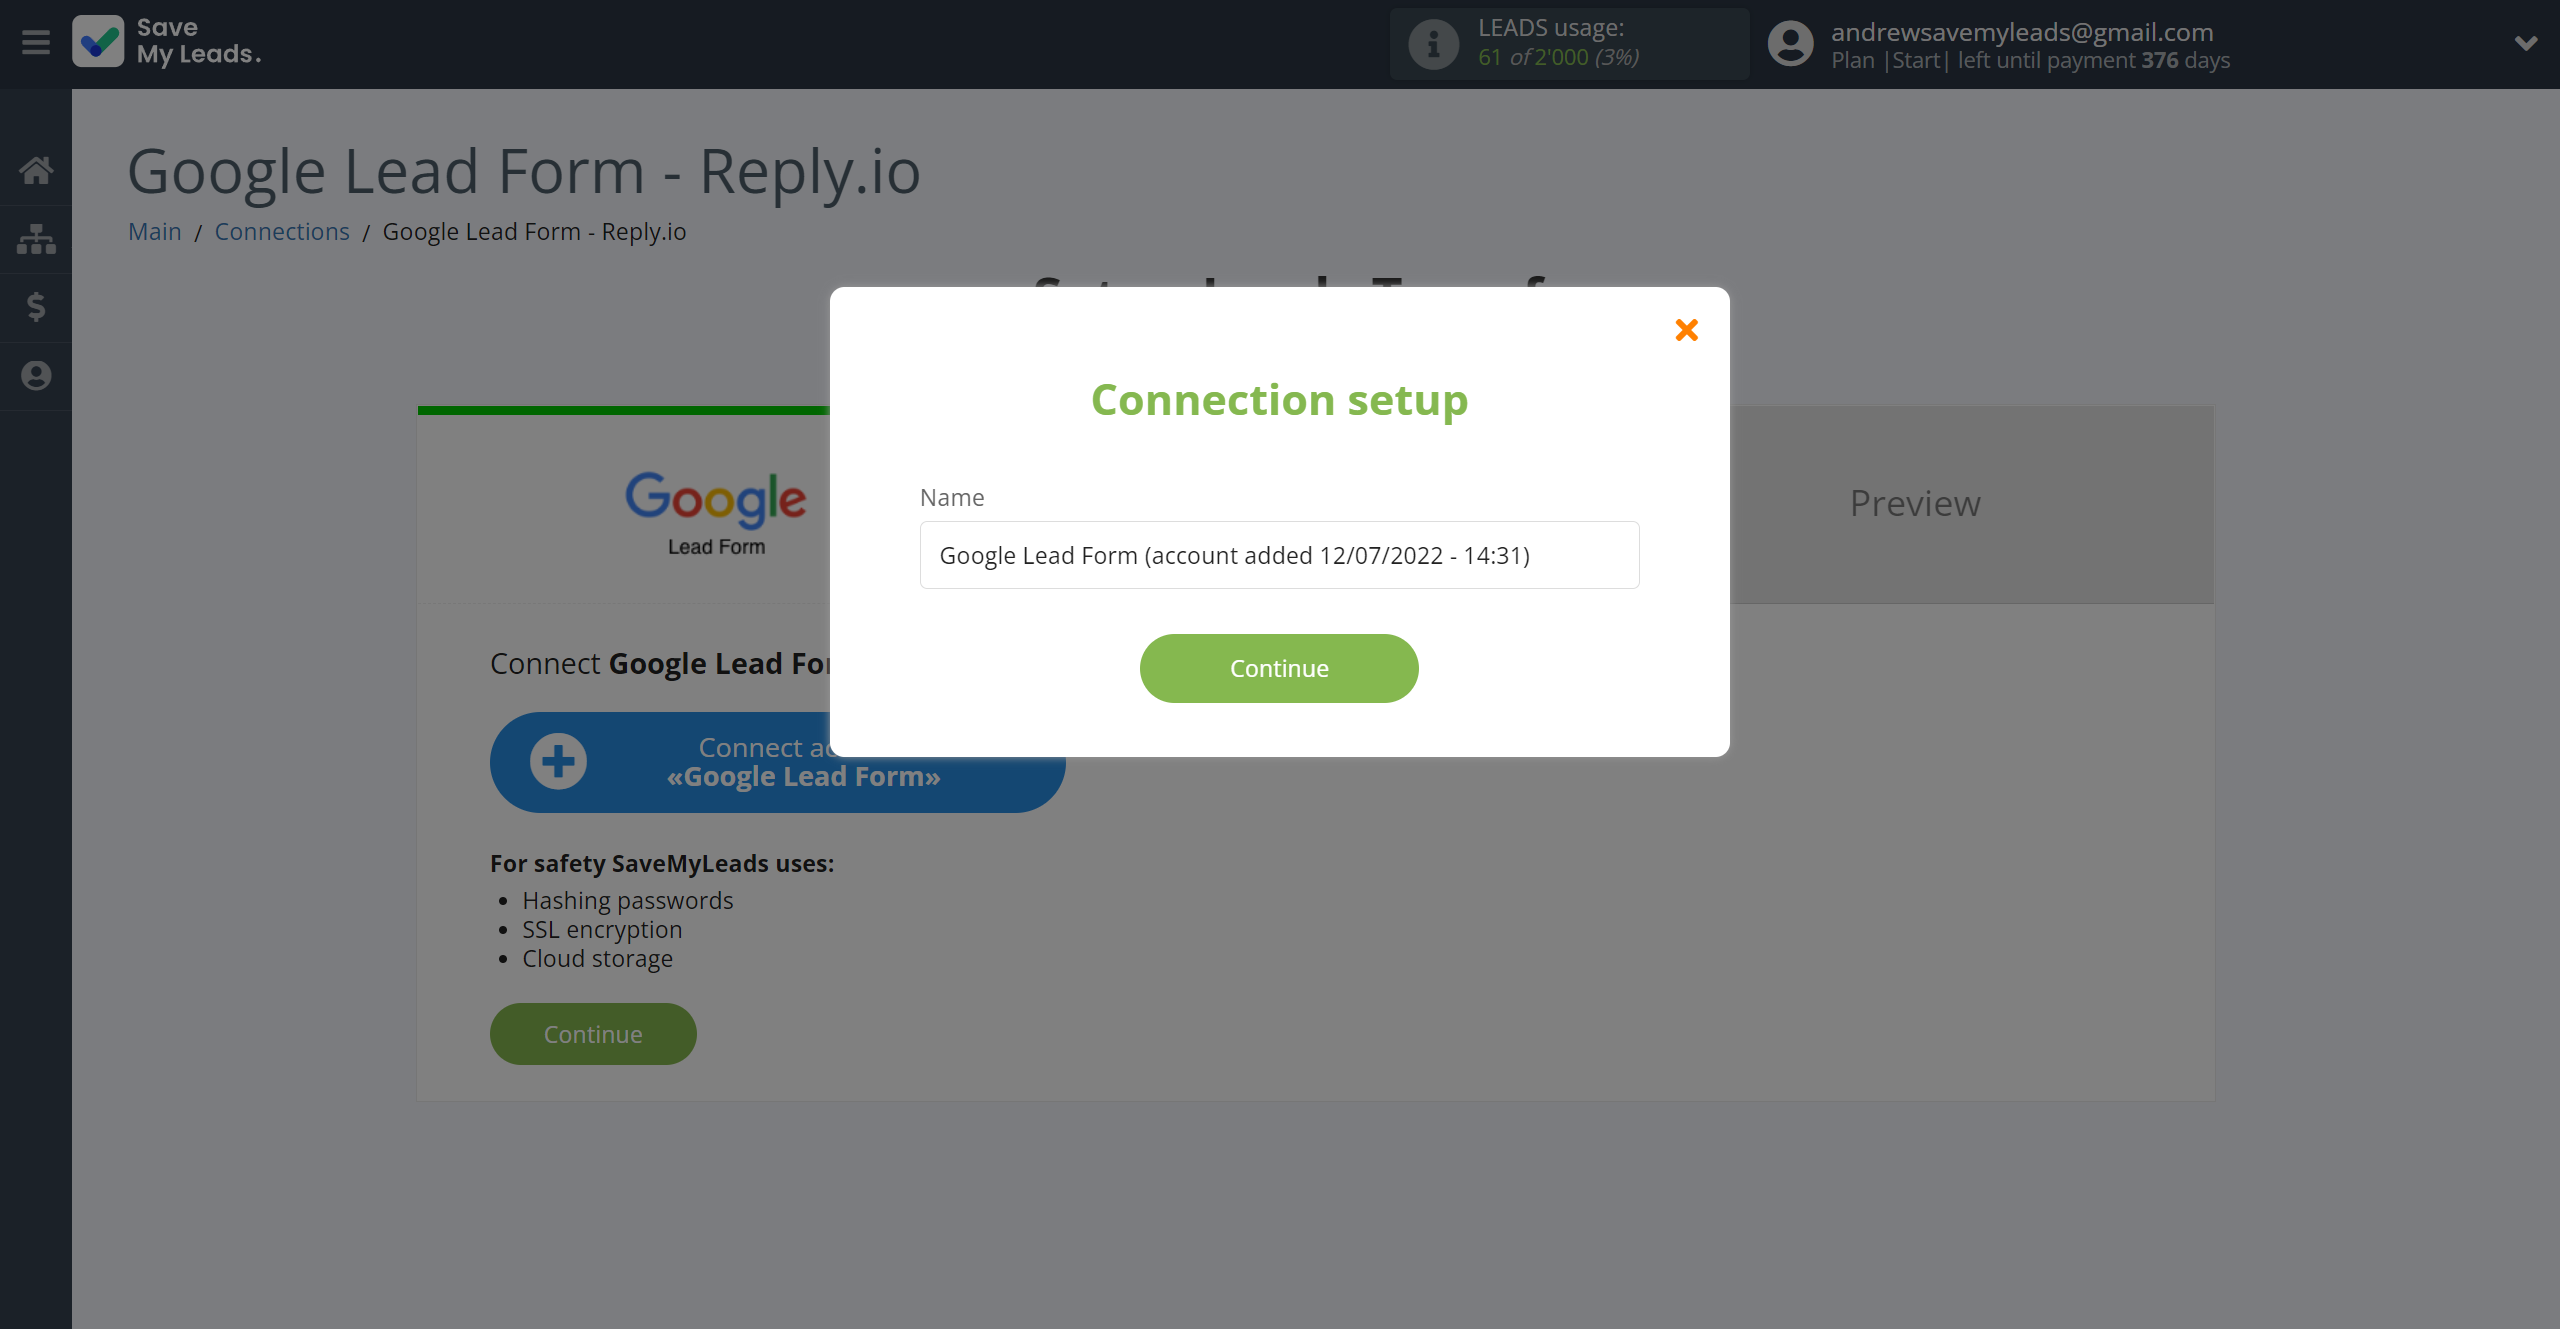 How to Connect Google Lead Form with Reply.io | Data Source account connection